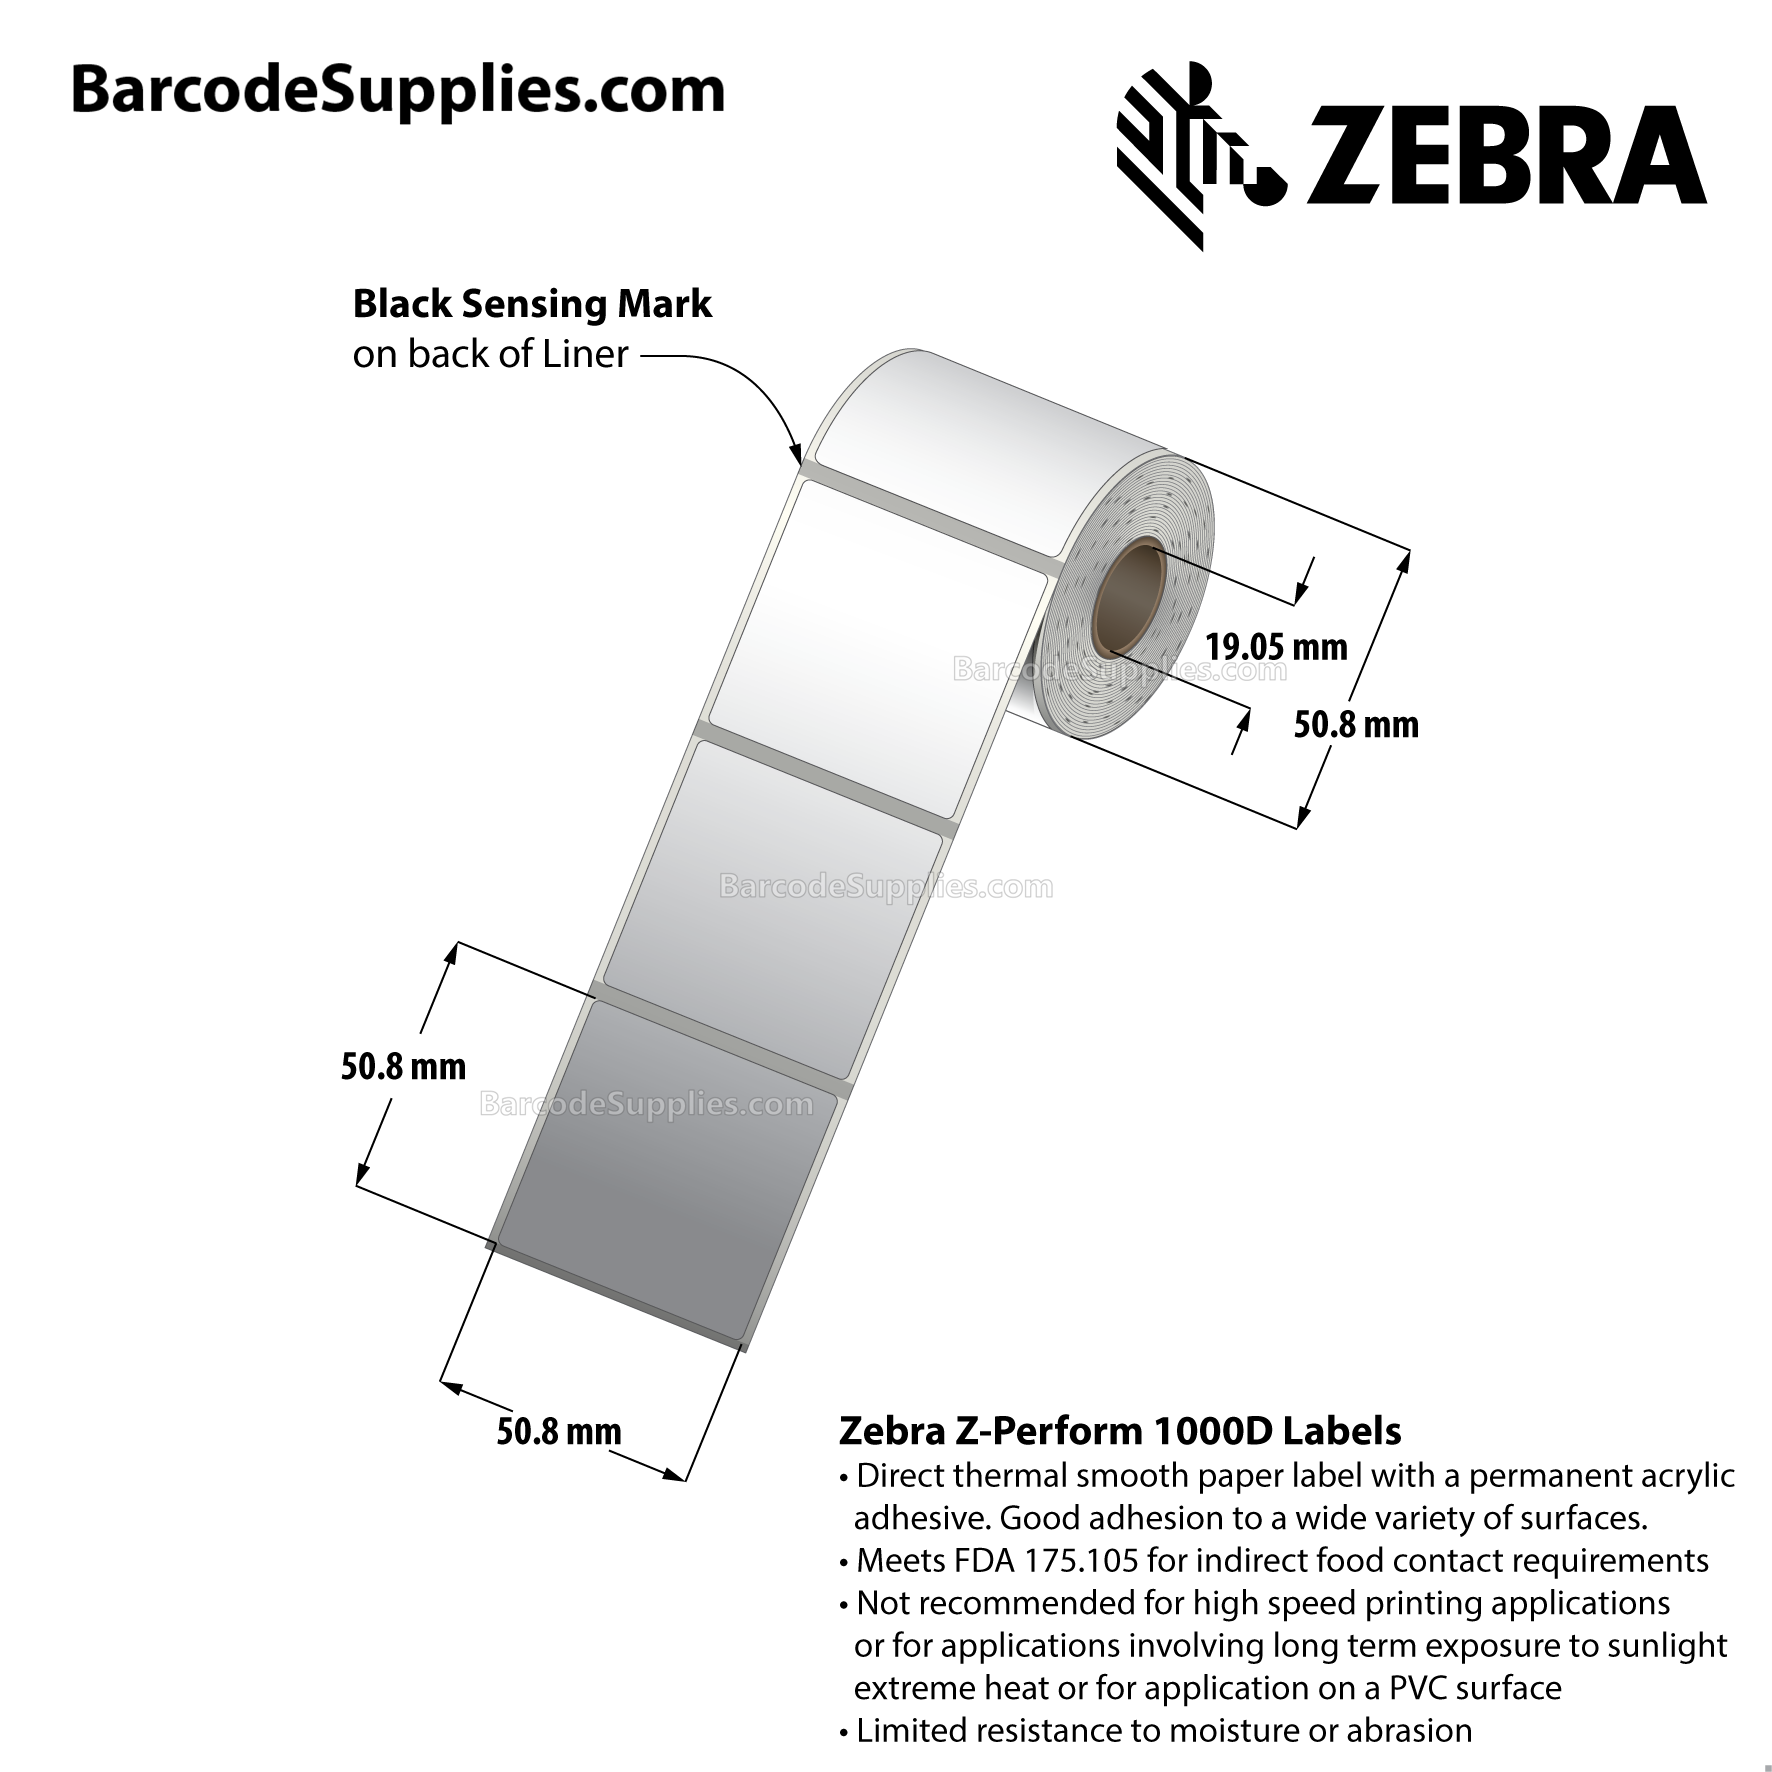 2 x 2 Direct Thermal White Z-Perform 1000D Labels With Permanent Adhesive - Black mark sensing - Not Perforated - 185 Labels Per Roll - Carton Of 36 Rolls - 6660 Labels Total - MPN: LD-R7AO5B